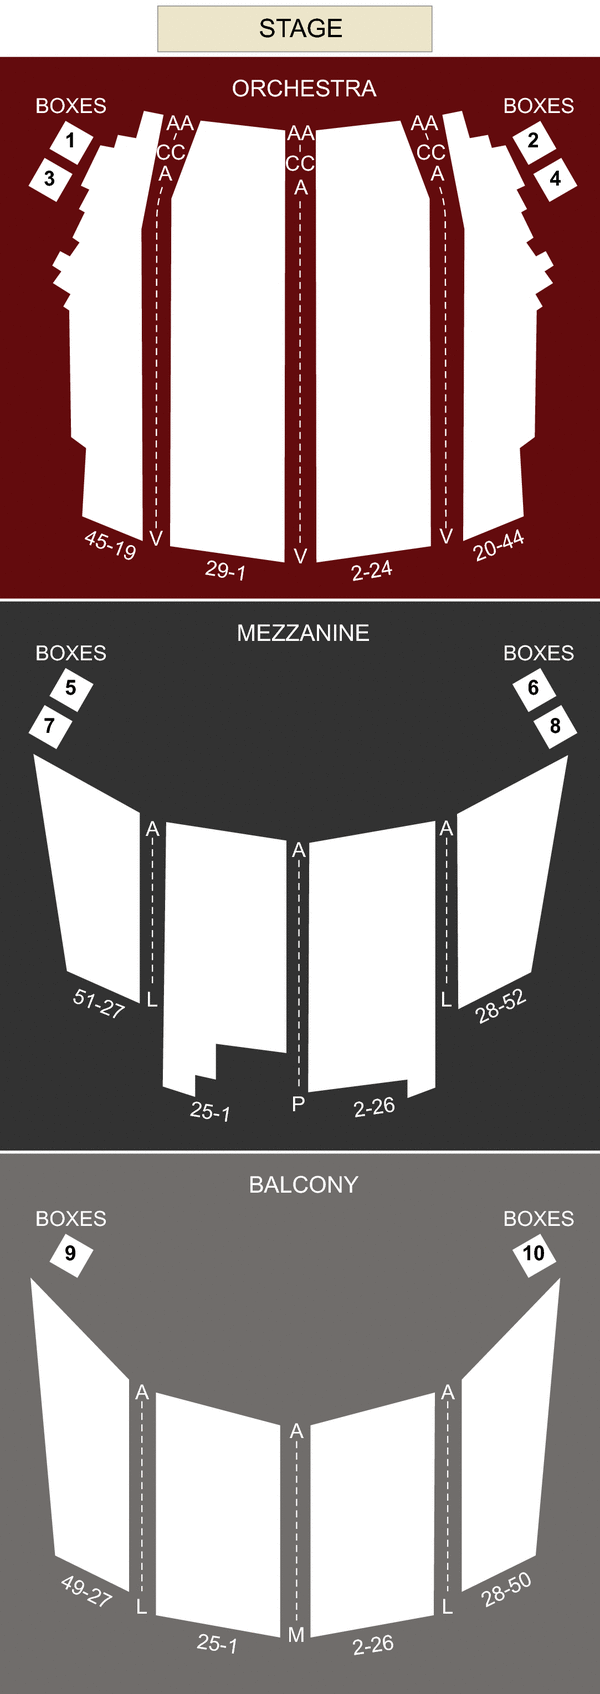 BAM Gilman Opera House, Brooklyn, NY - Seating Chart & Stage ...